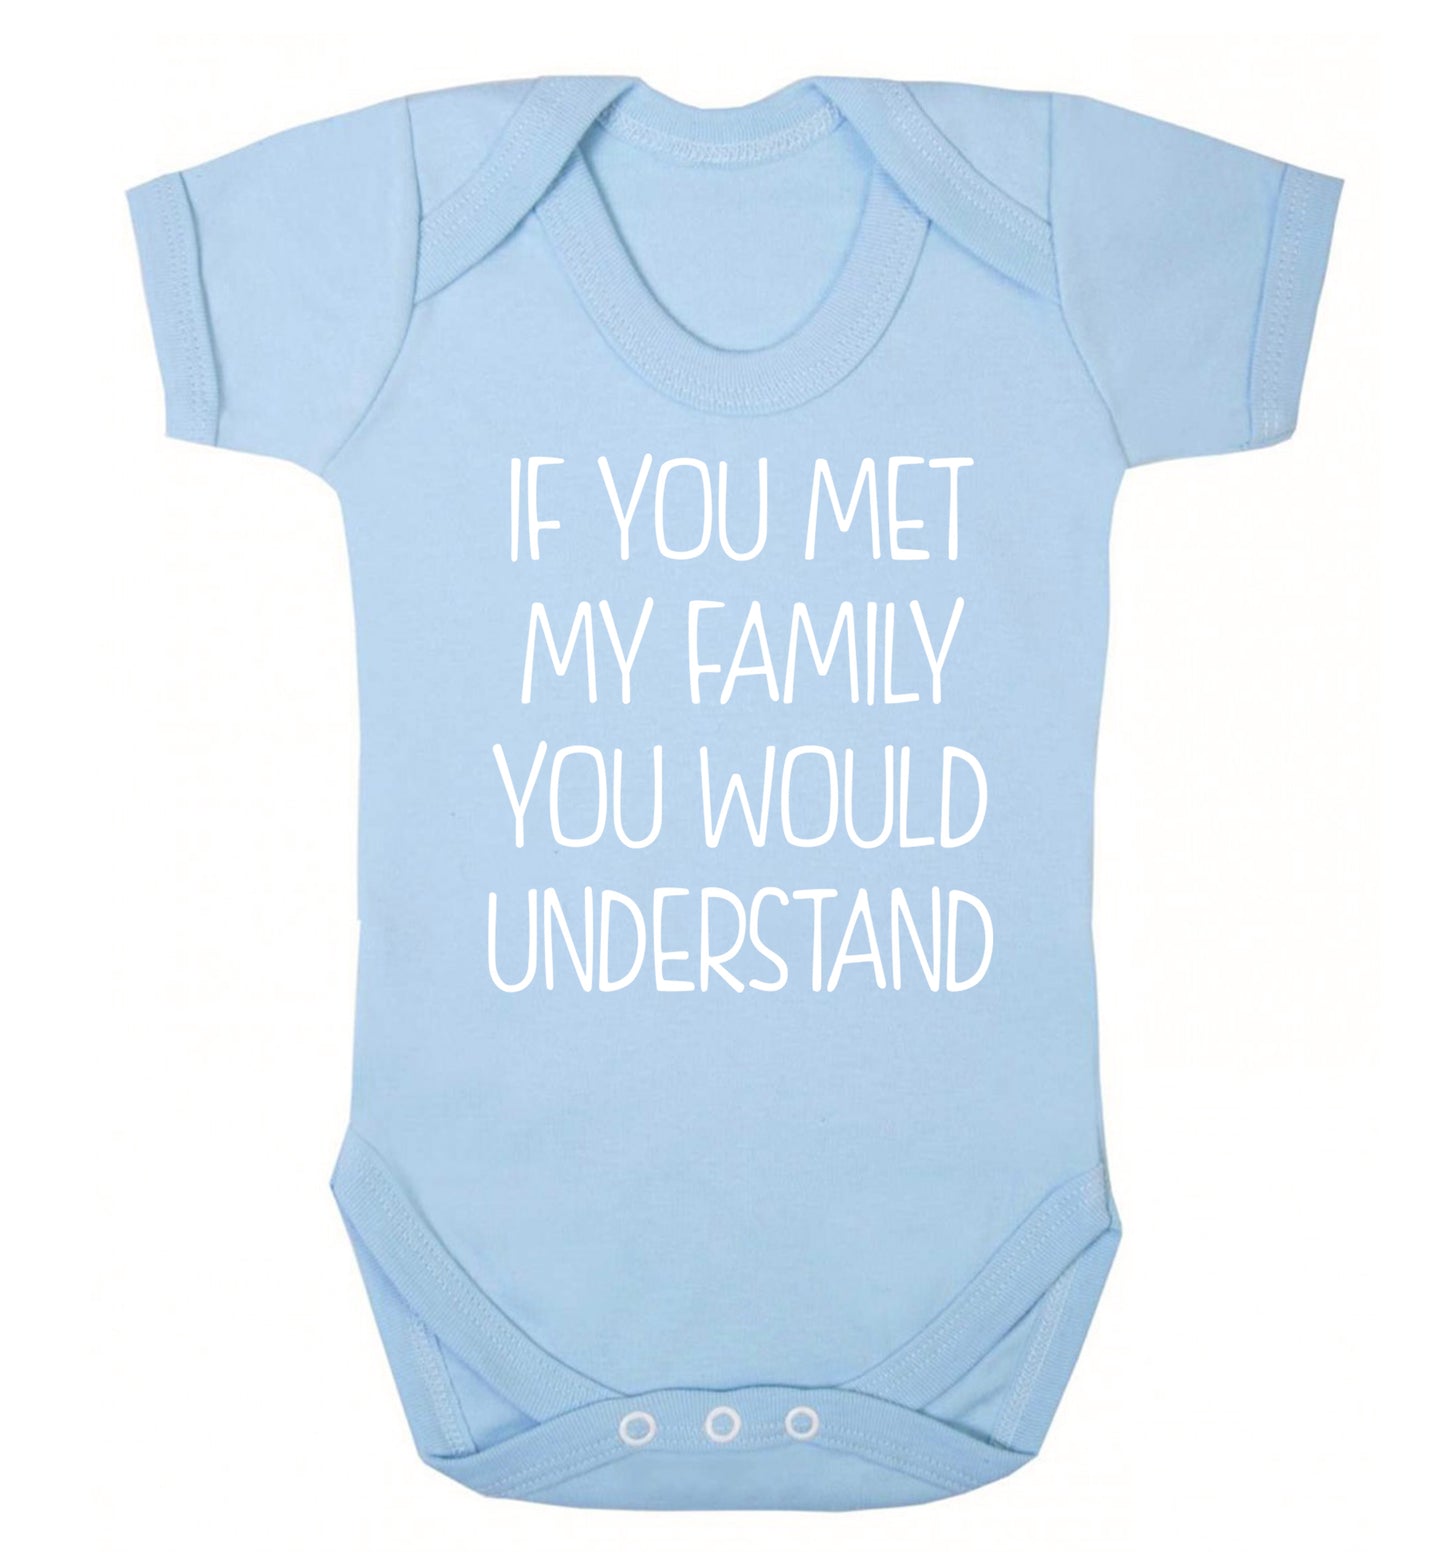 If you met my family you would understand Baby Vest pale blue 18-24 months